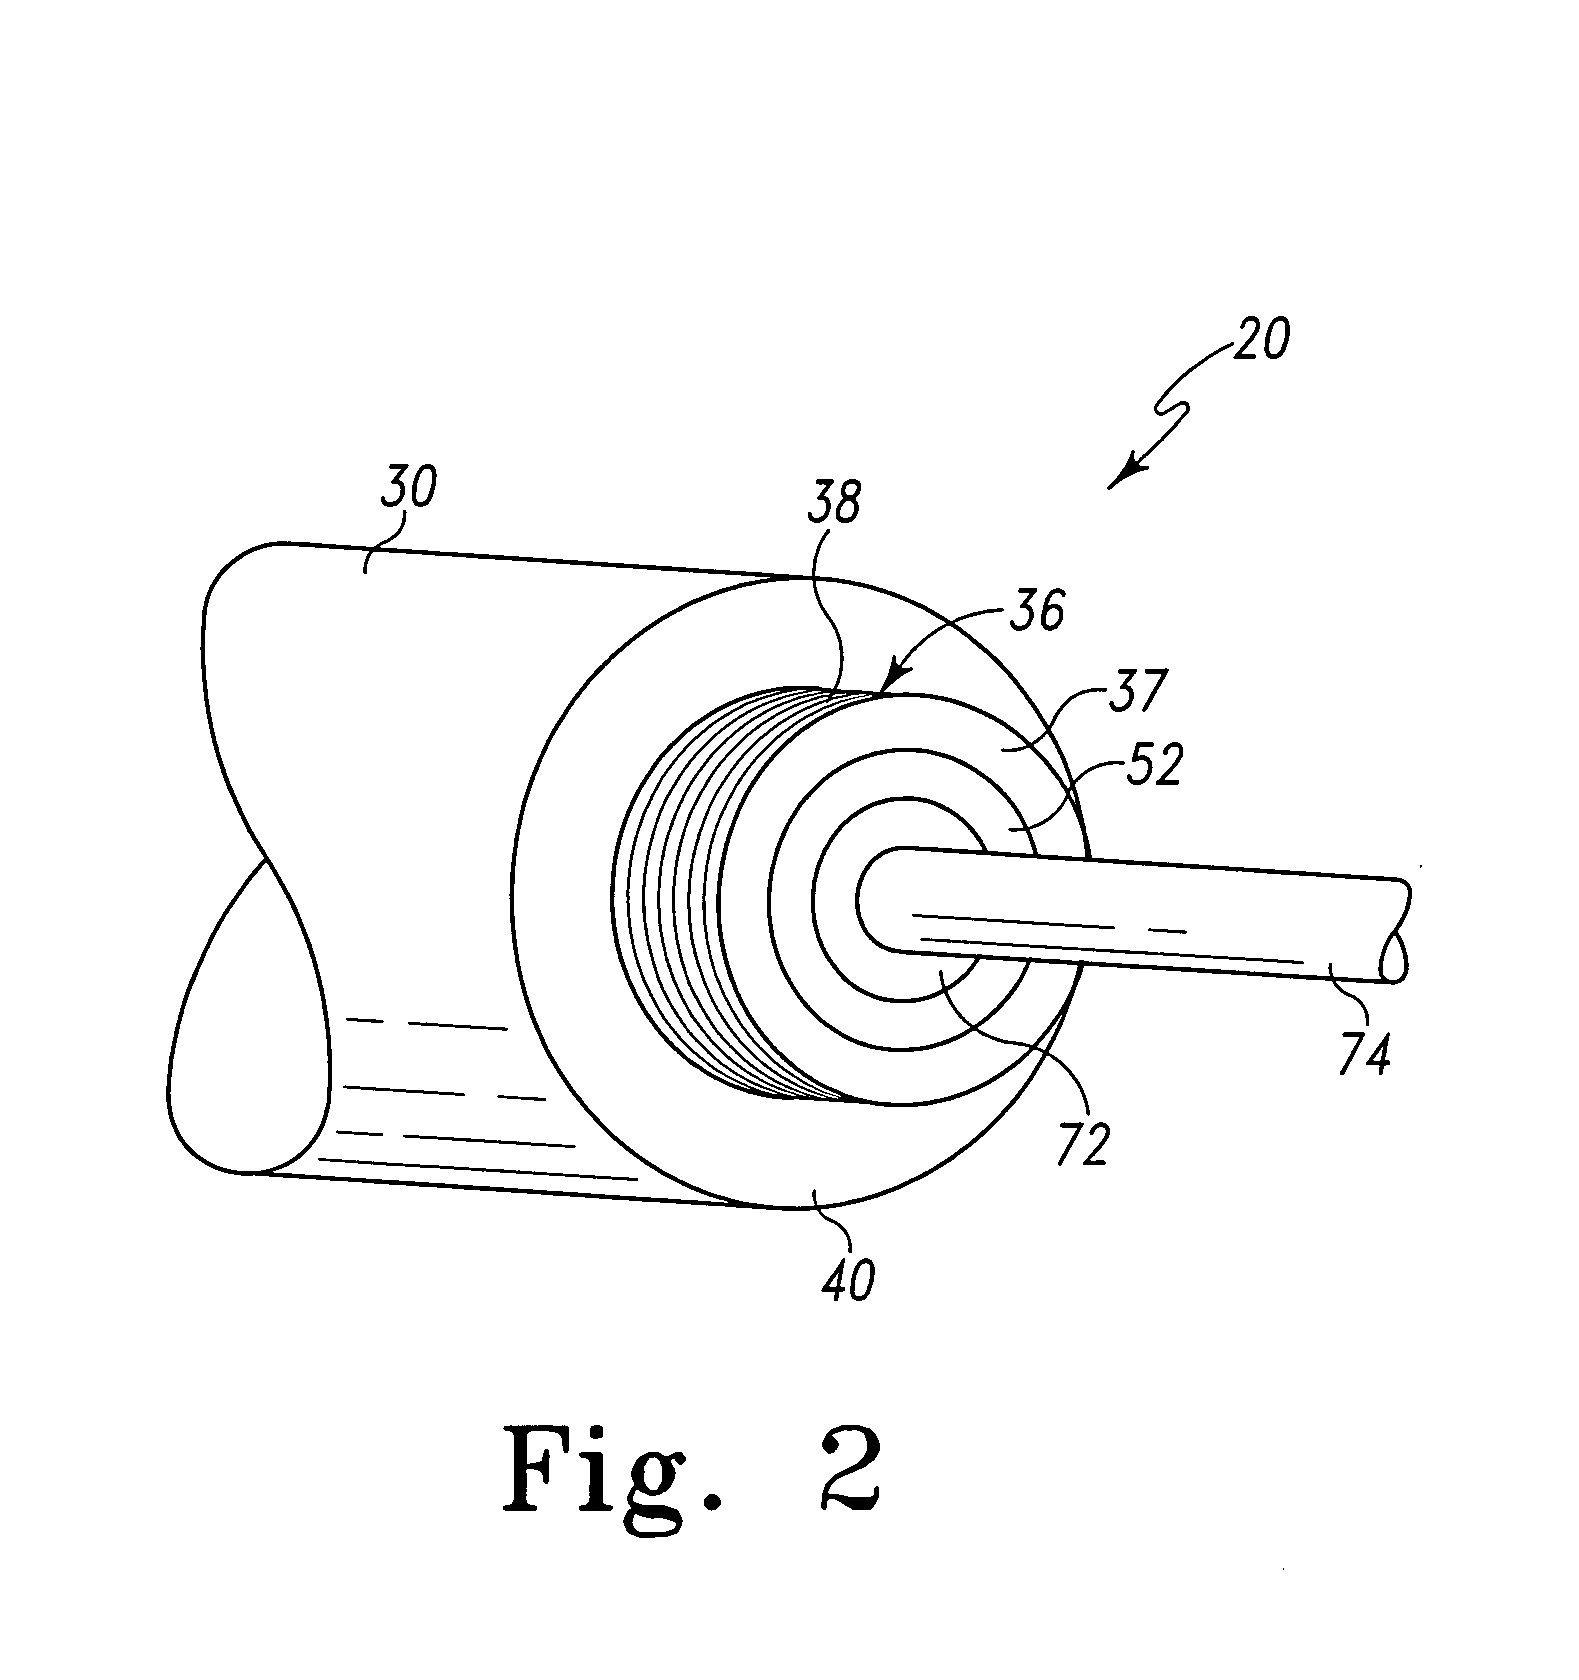 Torque limiting driver with easily disassembled components for sterilization